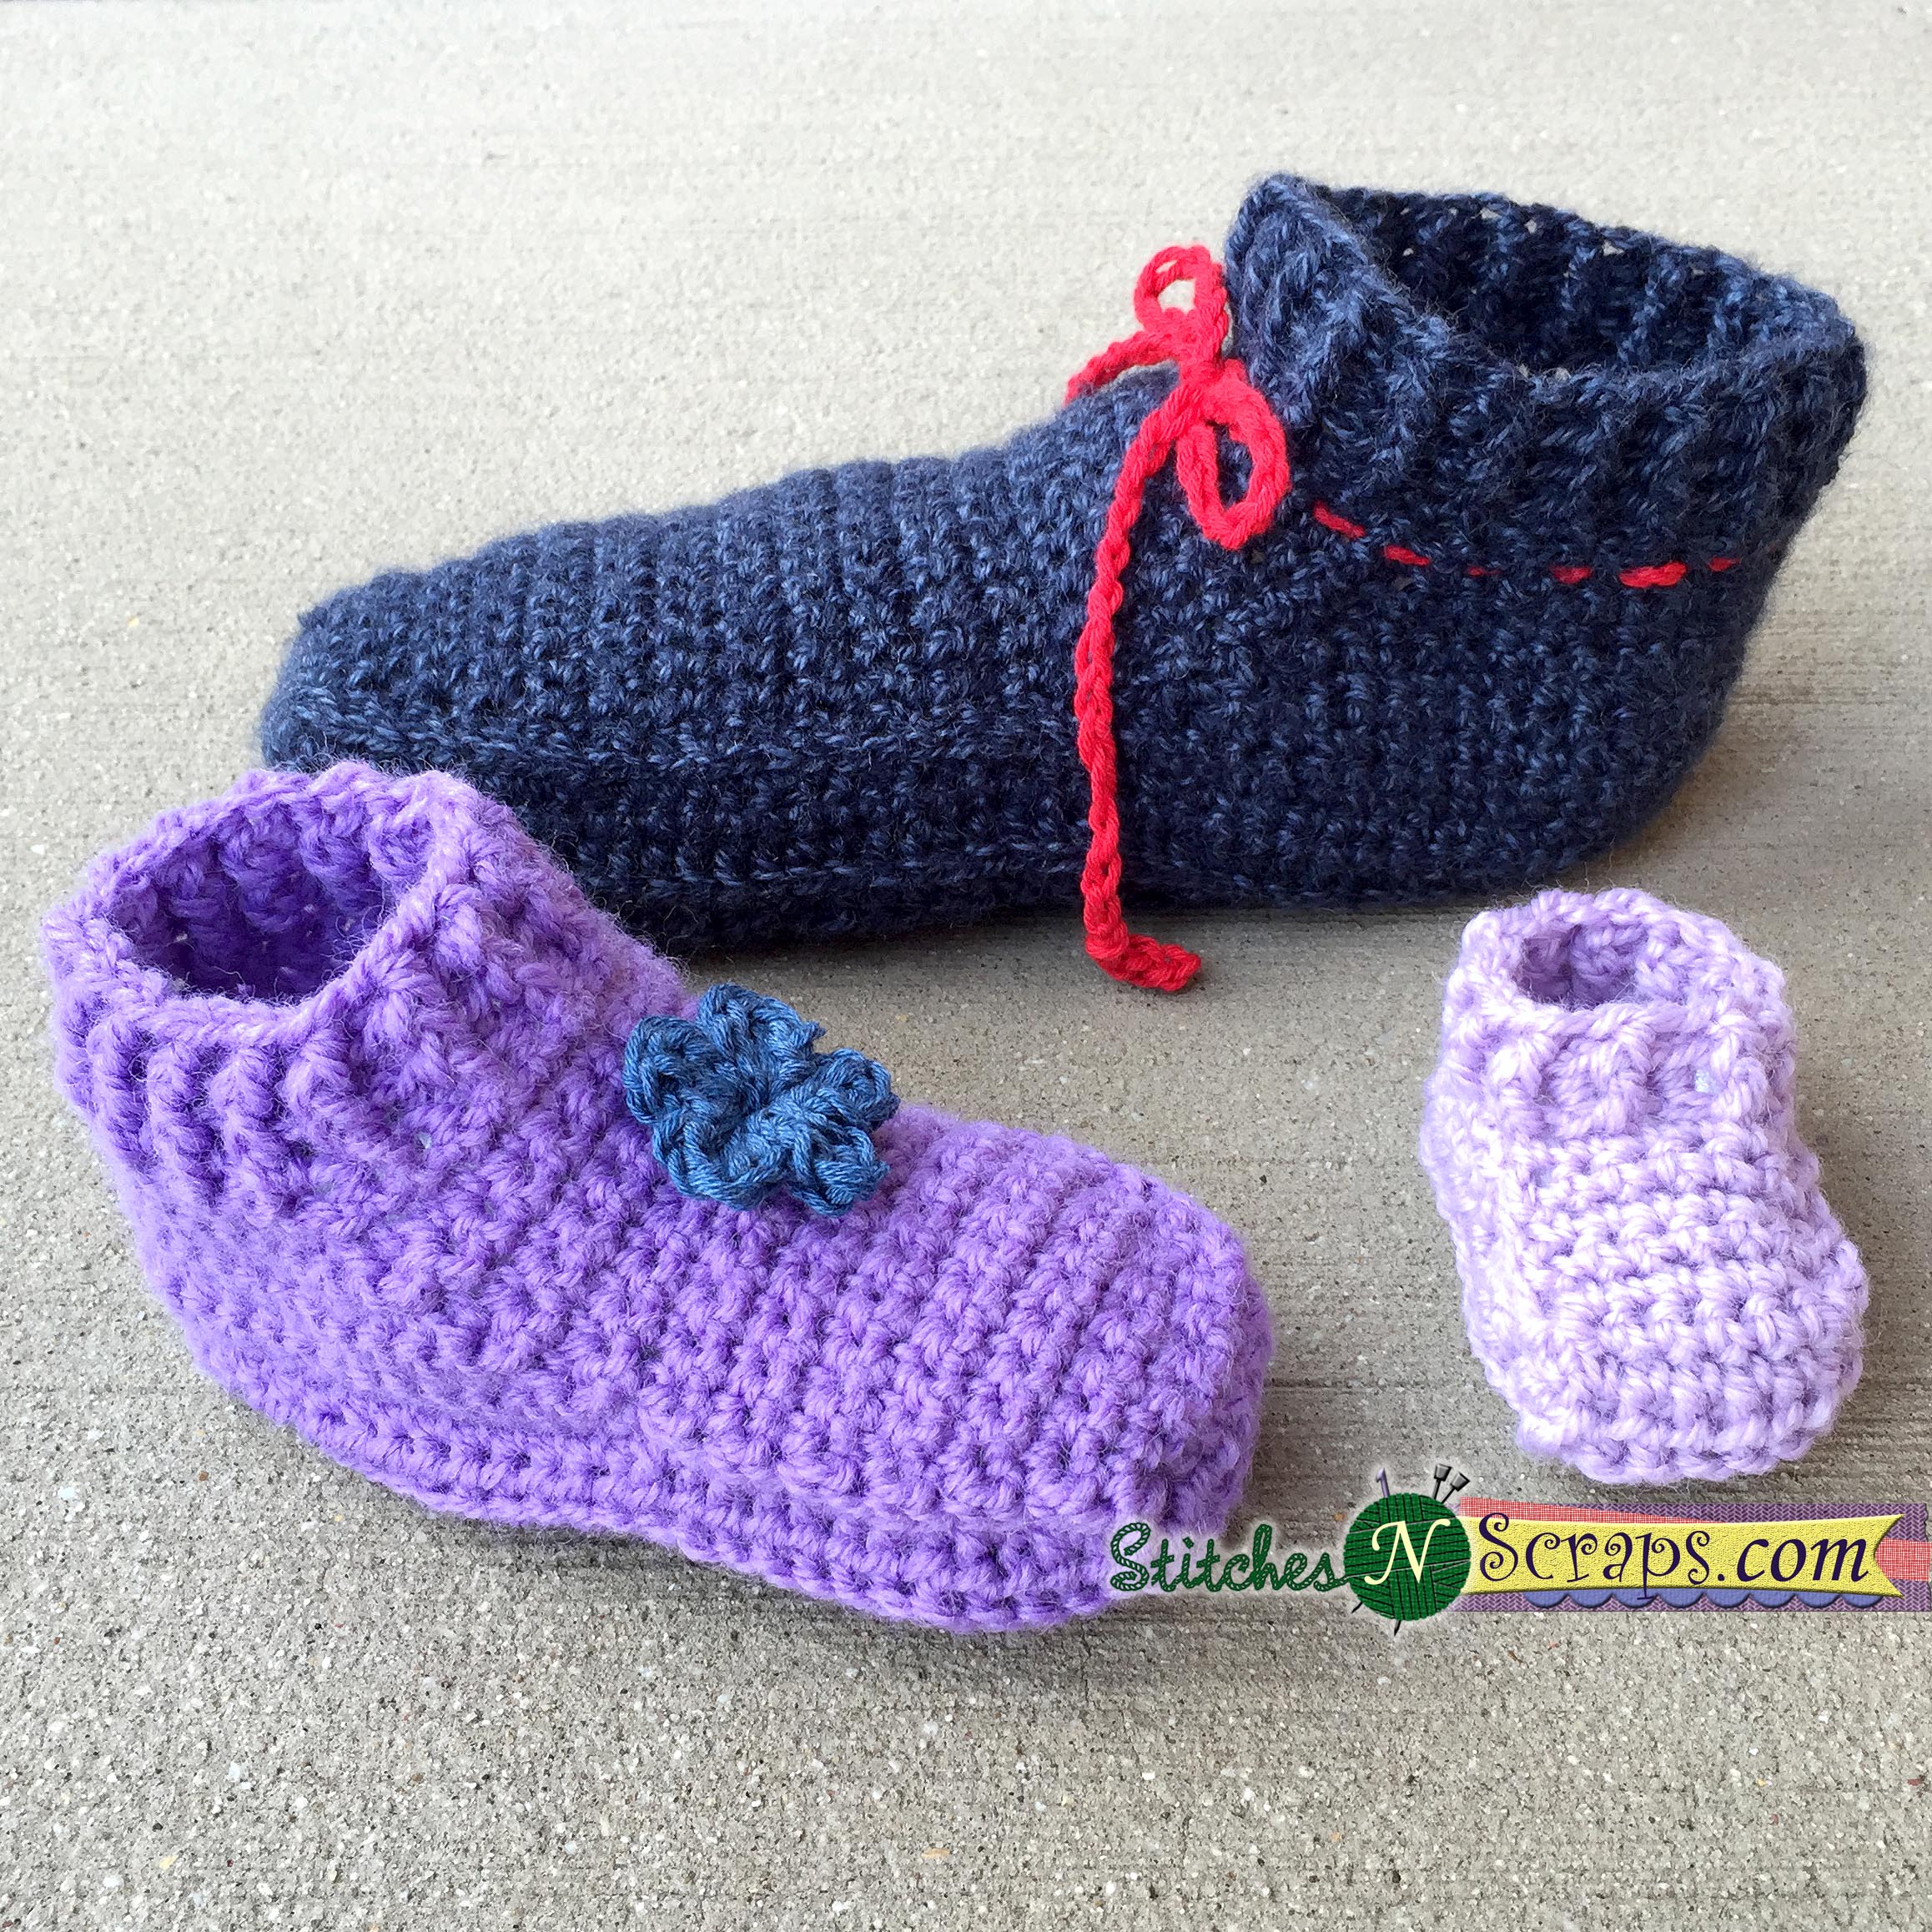 Non-stop slippers - available in 9 sizes!